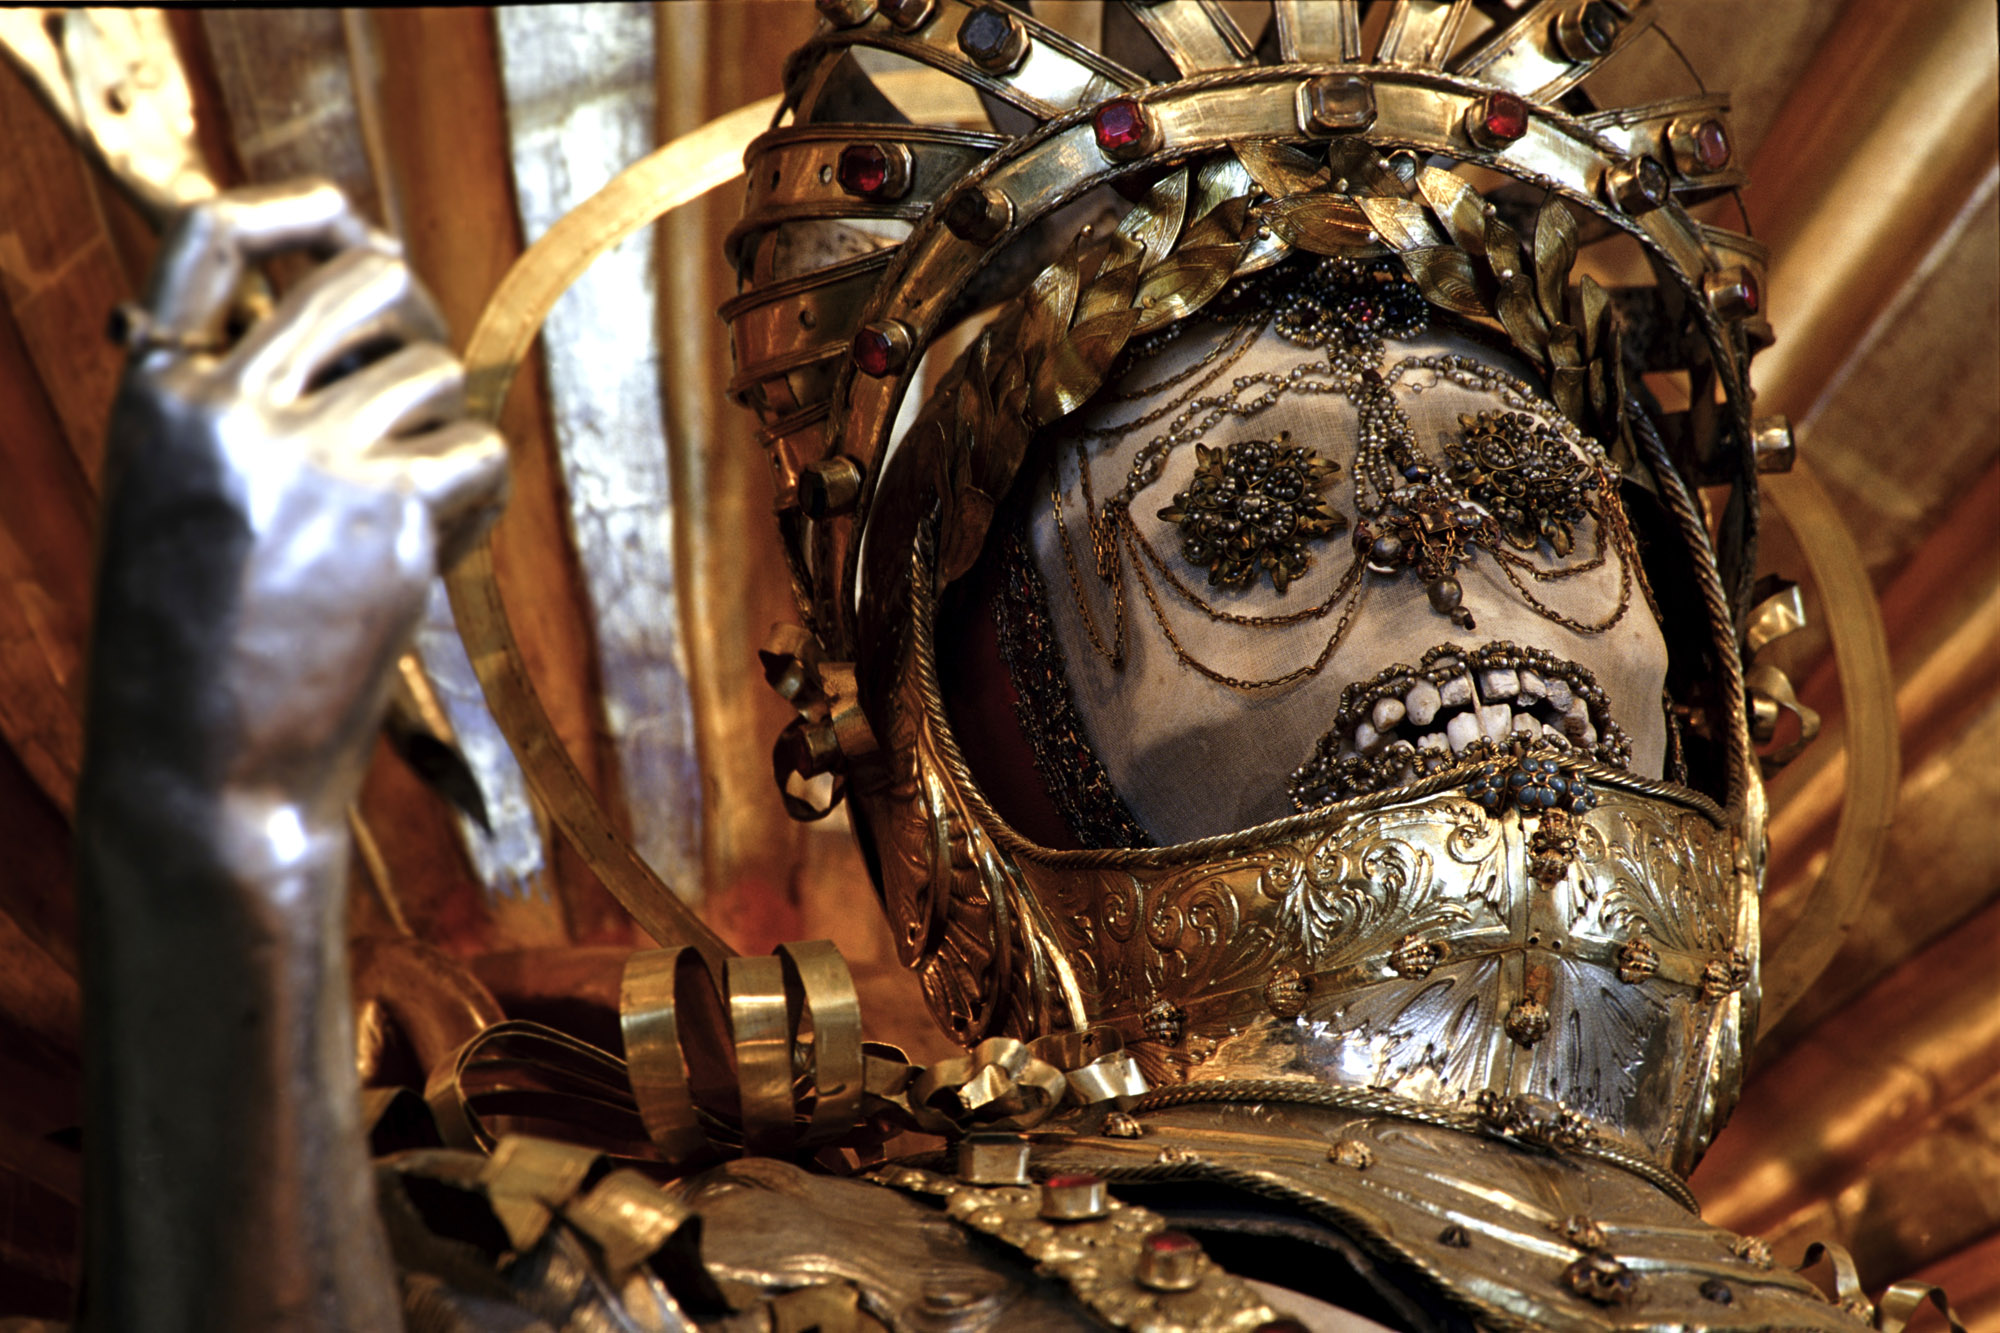 - Bürglen, Switzerland, detail of the skull St. Maximus inside armored helmet. One of two surviving skeletons of saints taken from the Roman Catacombs as presumed martyrs and decorated in armor in Switz -